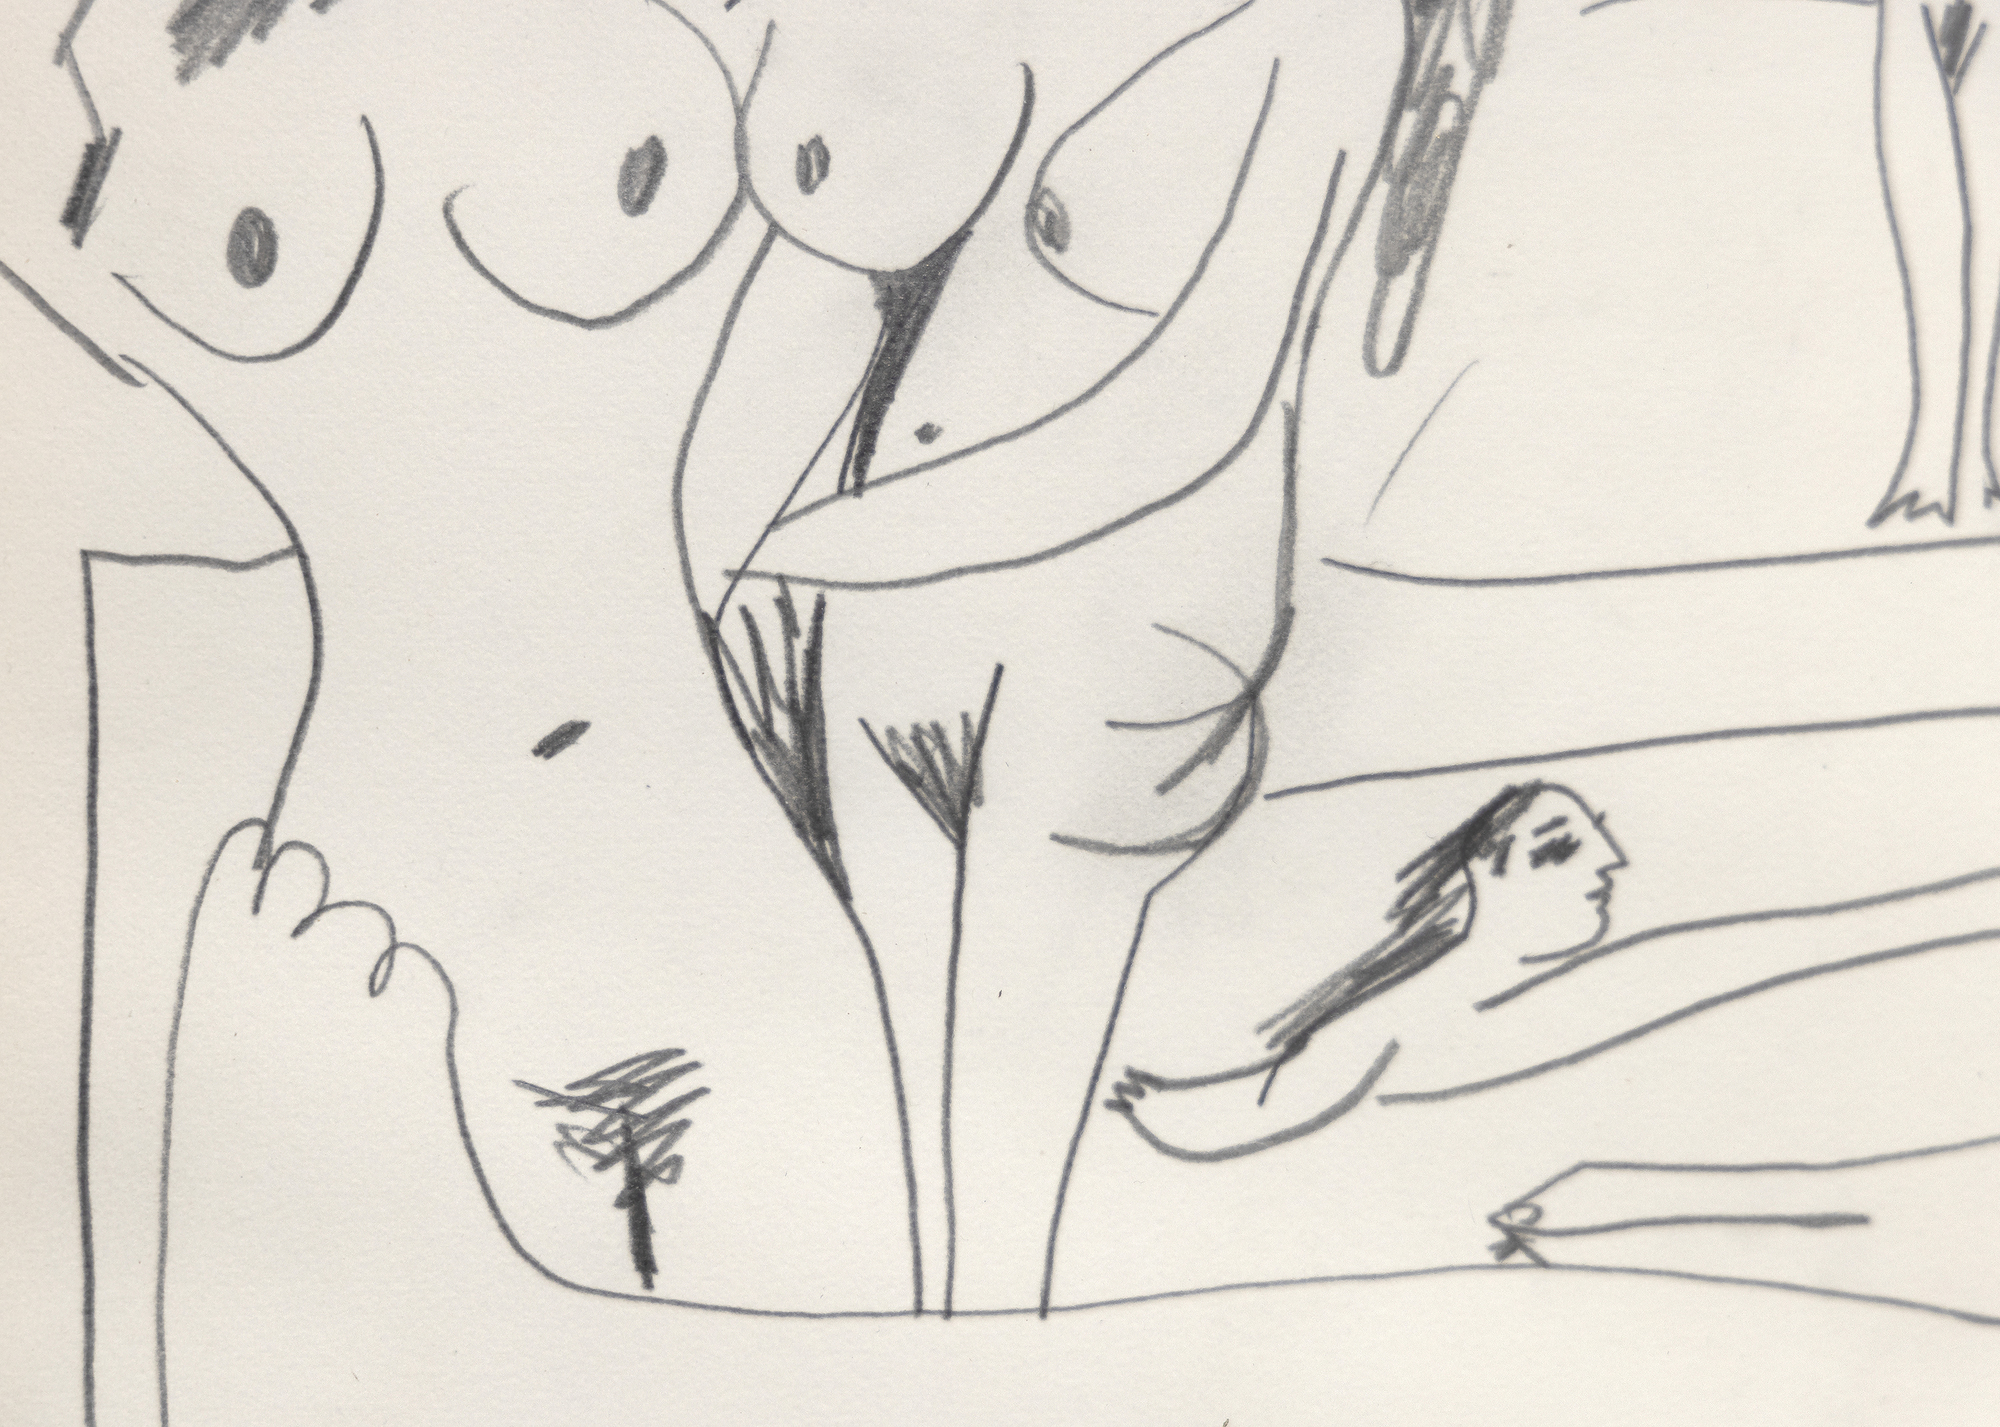 The figures of Nues are freely developed around a central odalisque figure in a manner that suggests a theme that occupied Picasso as early as 1906   that of female indulgences within a harem setting.  In describing his late drawings, Picasso noted that, “one never knows what’s going to come out, but as soon as the drawing gets underway, a story or an idea is born… I spend hour after hour while I draw, observing my creatures and thinking about the mad things they’re up to… It’s great fun, believe me.” Nues is evocative of that appraisal, a freewheeling frolic as only Picasso can achieve. Among the many poses, the abbreviated figure swimming in the pool is particularly charming.